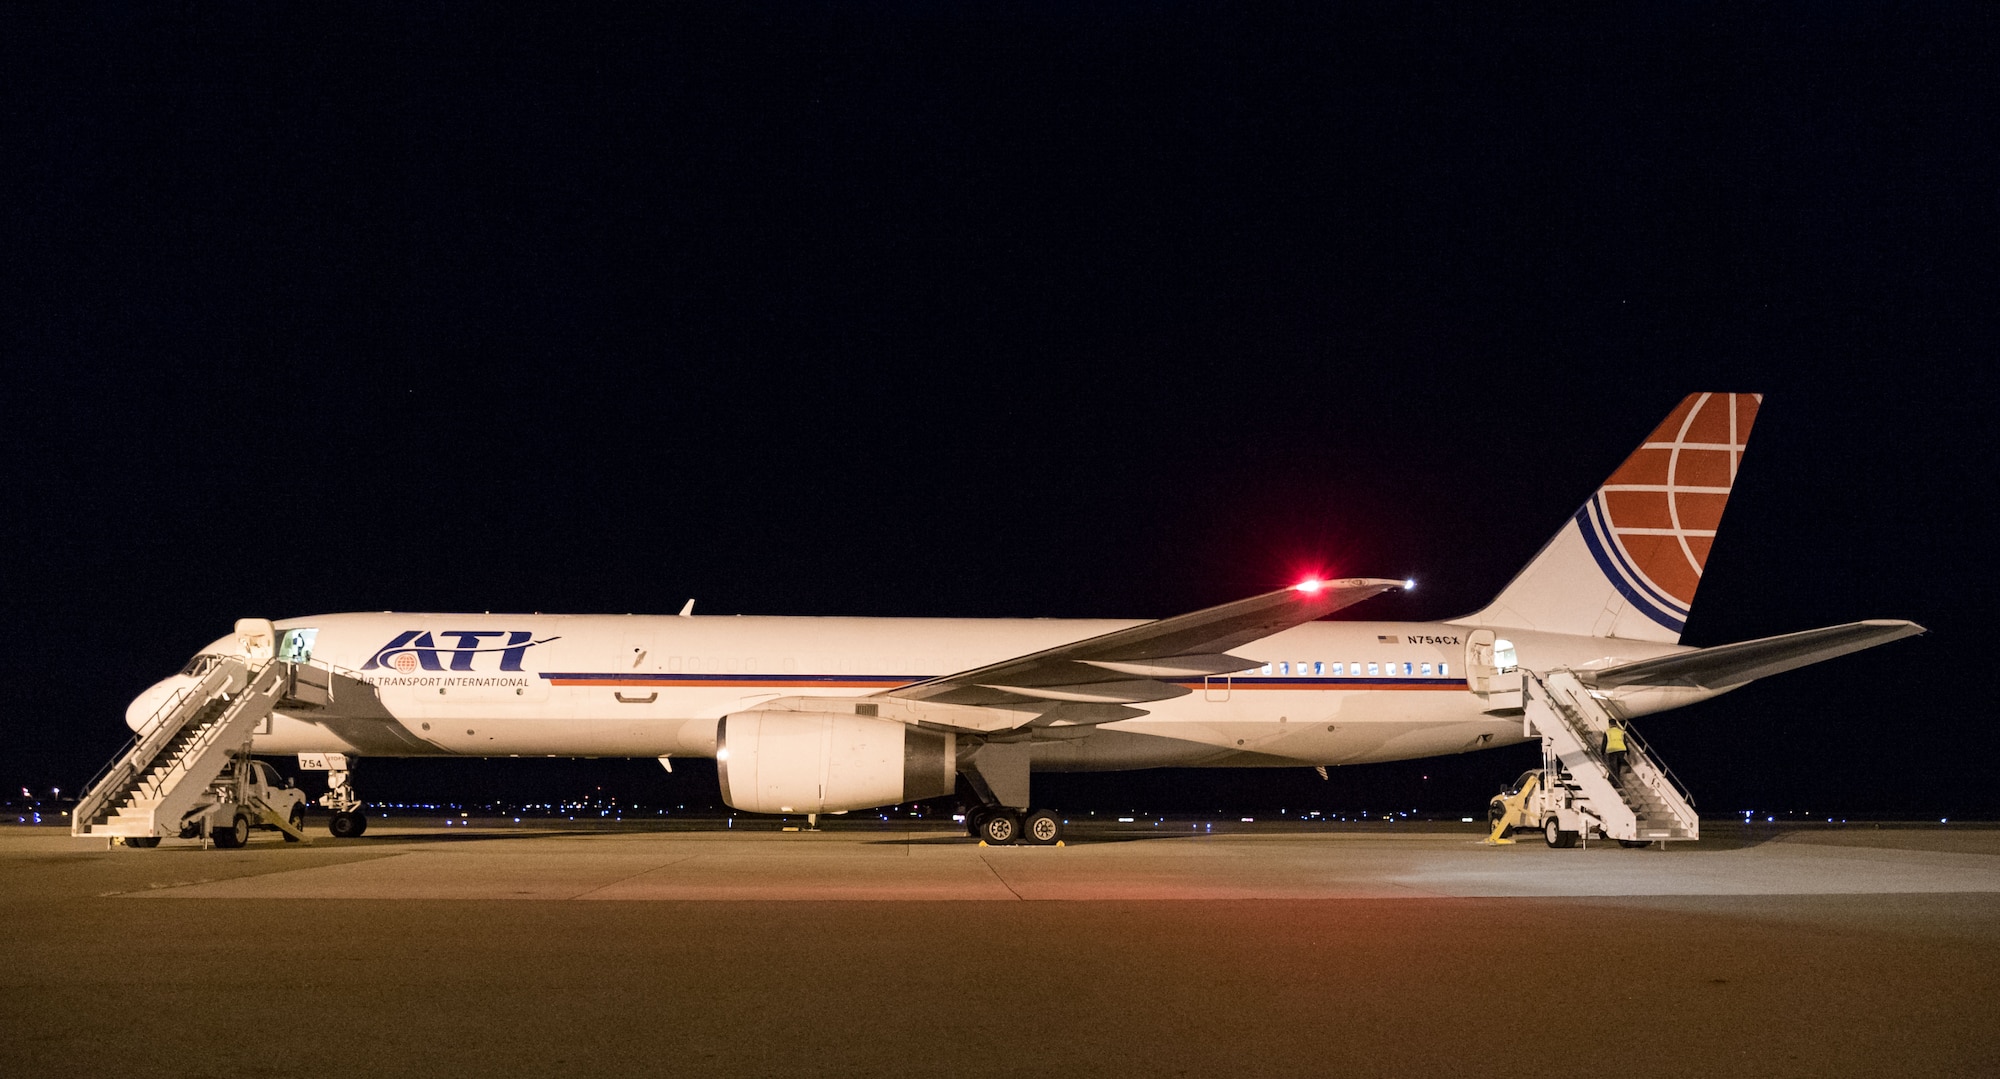 Step trucks sit parked at the forward and aft sections of an Air Transport International Boeing 757-200 Sept. 8, 2019, at Dover Air Force Base, Del. The ATI aircraft, part of the Civil Reserve Air Fleet program, was contracted to transport cargo and 30 Team Dover members to Fairchild AFB, Wash., participating in Mobility Guardian 2019. “This mission is multidimensional and will provide a greater understanding of the commercial airlift capabilities and requirements across Air Mobility Command and the commercial airlift enterprise,” said Maj. Adam Crane, AMC Headquarters CRAF Branch Chief, Scott AFB, Ill. (U.S. Air Force photo by Roland Balik)